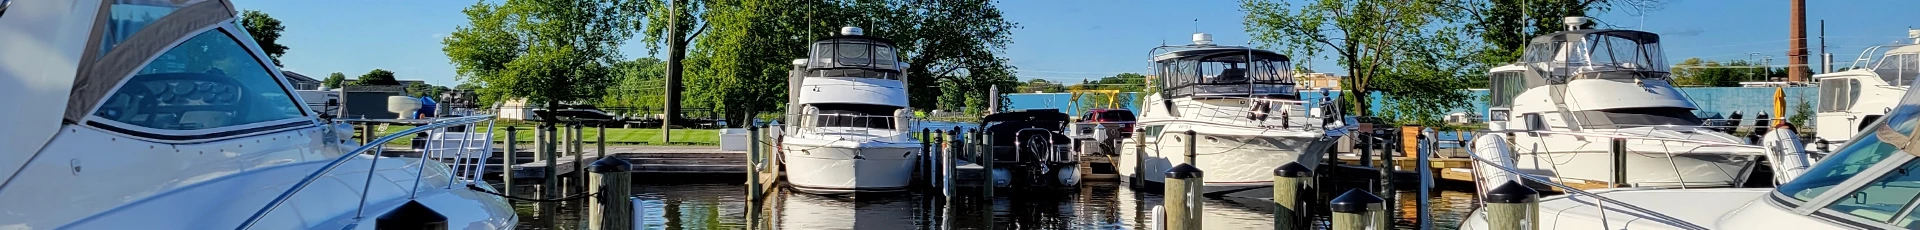 Boat Removal, Dismantle and Disposal in Superior Wisconsin